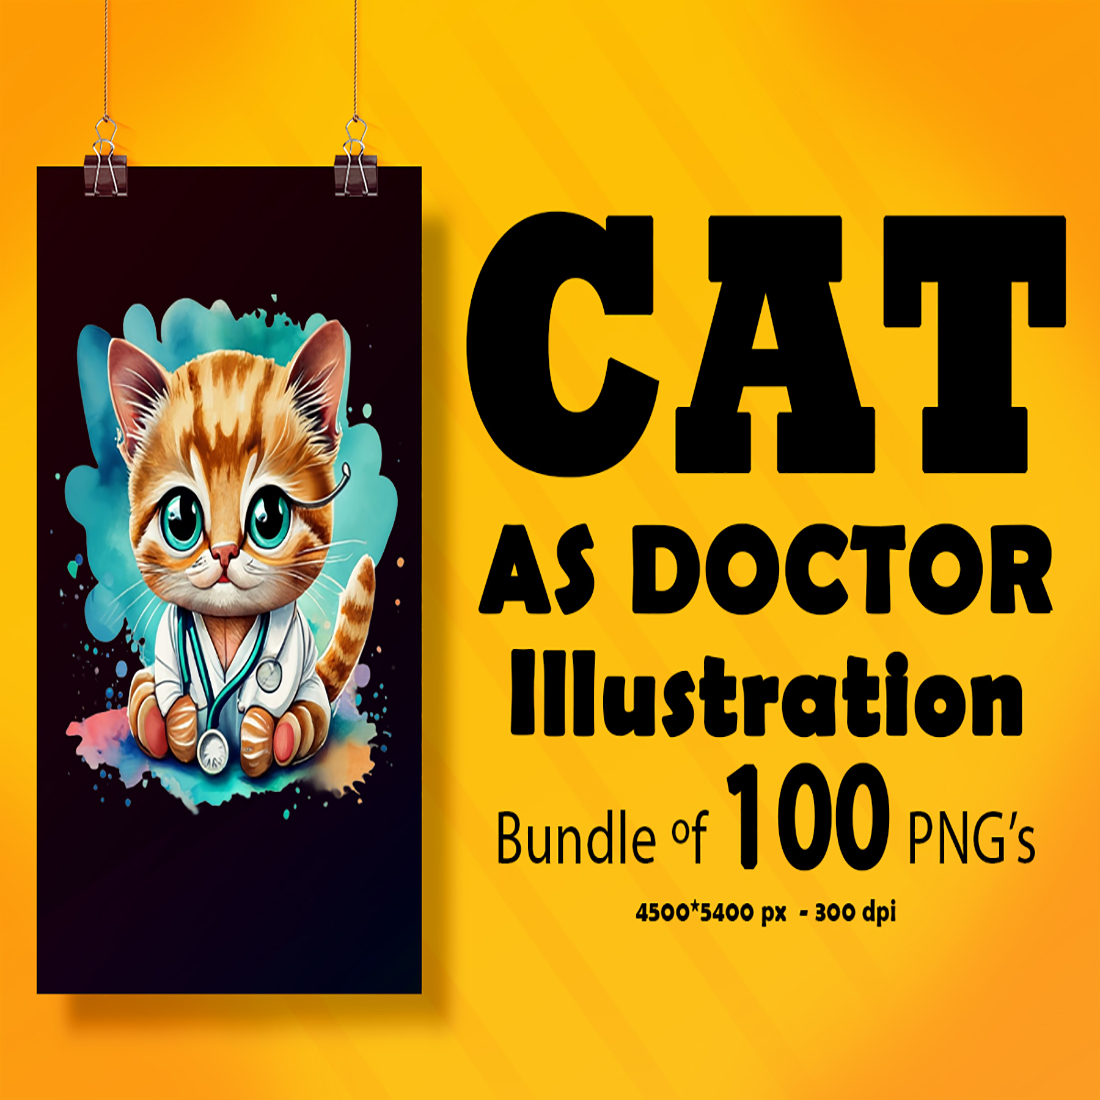 Cat as Doctor Illustration for POD 100 Clipart Bundle preview image.